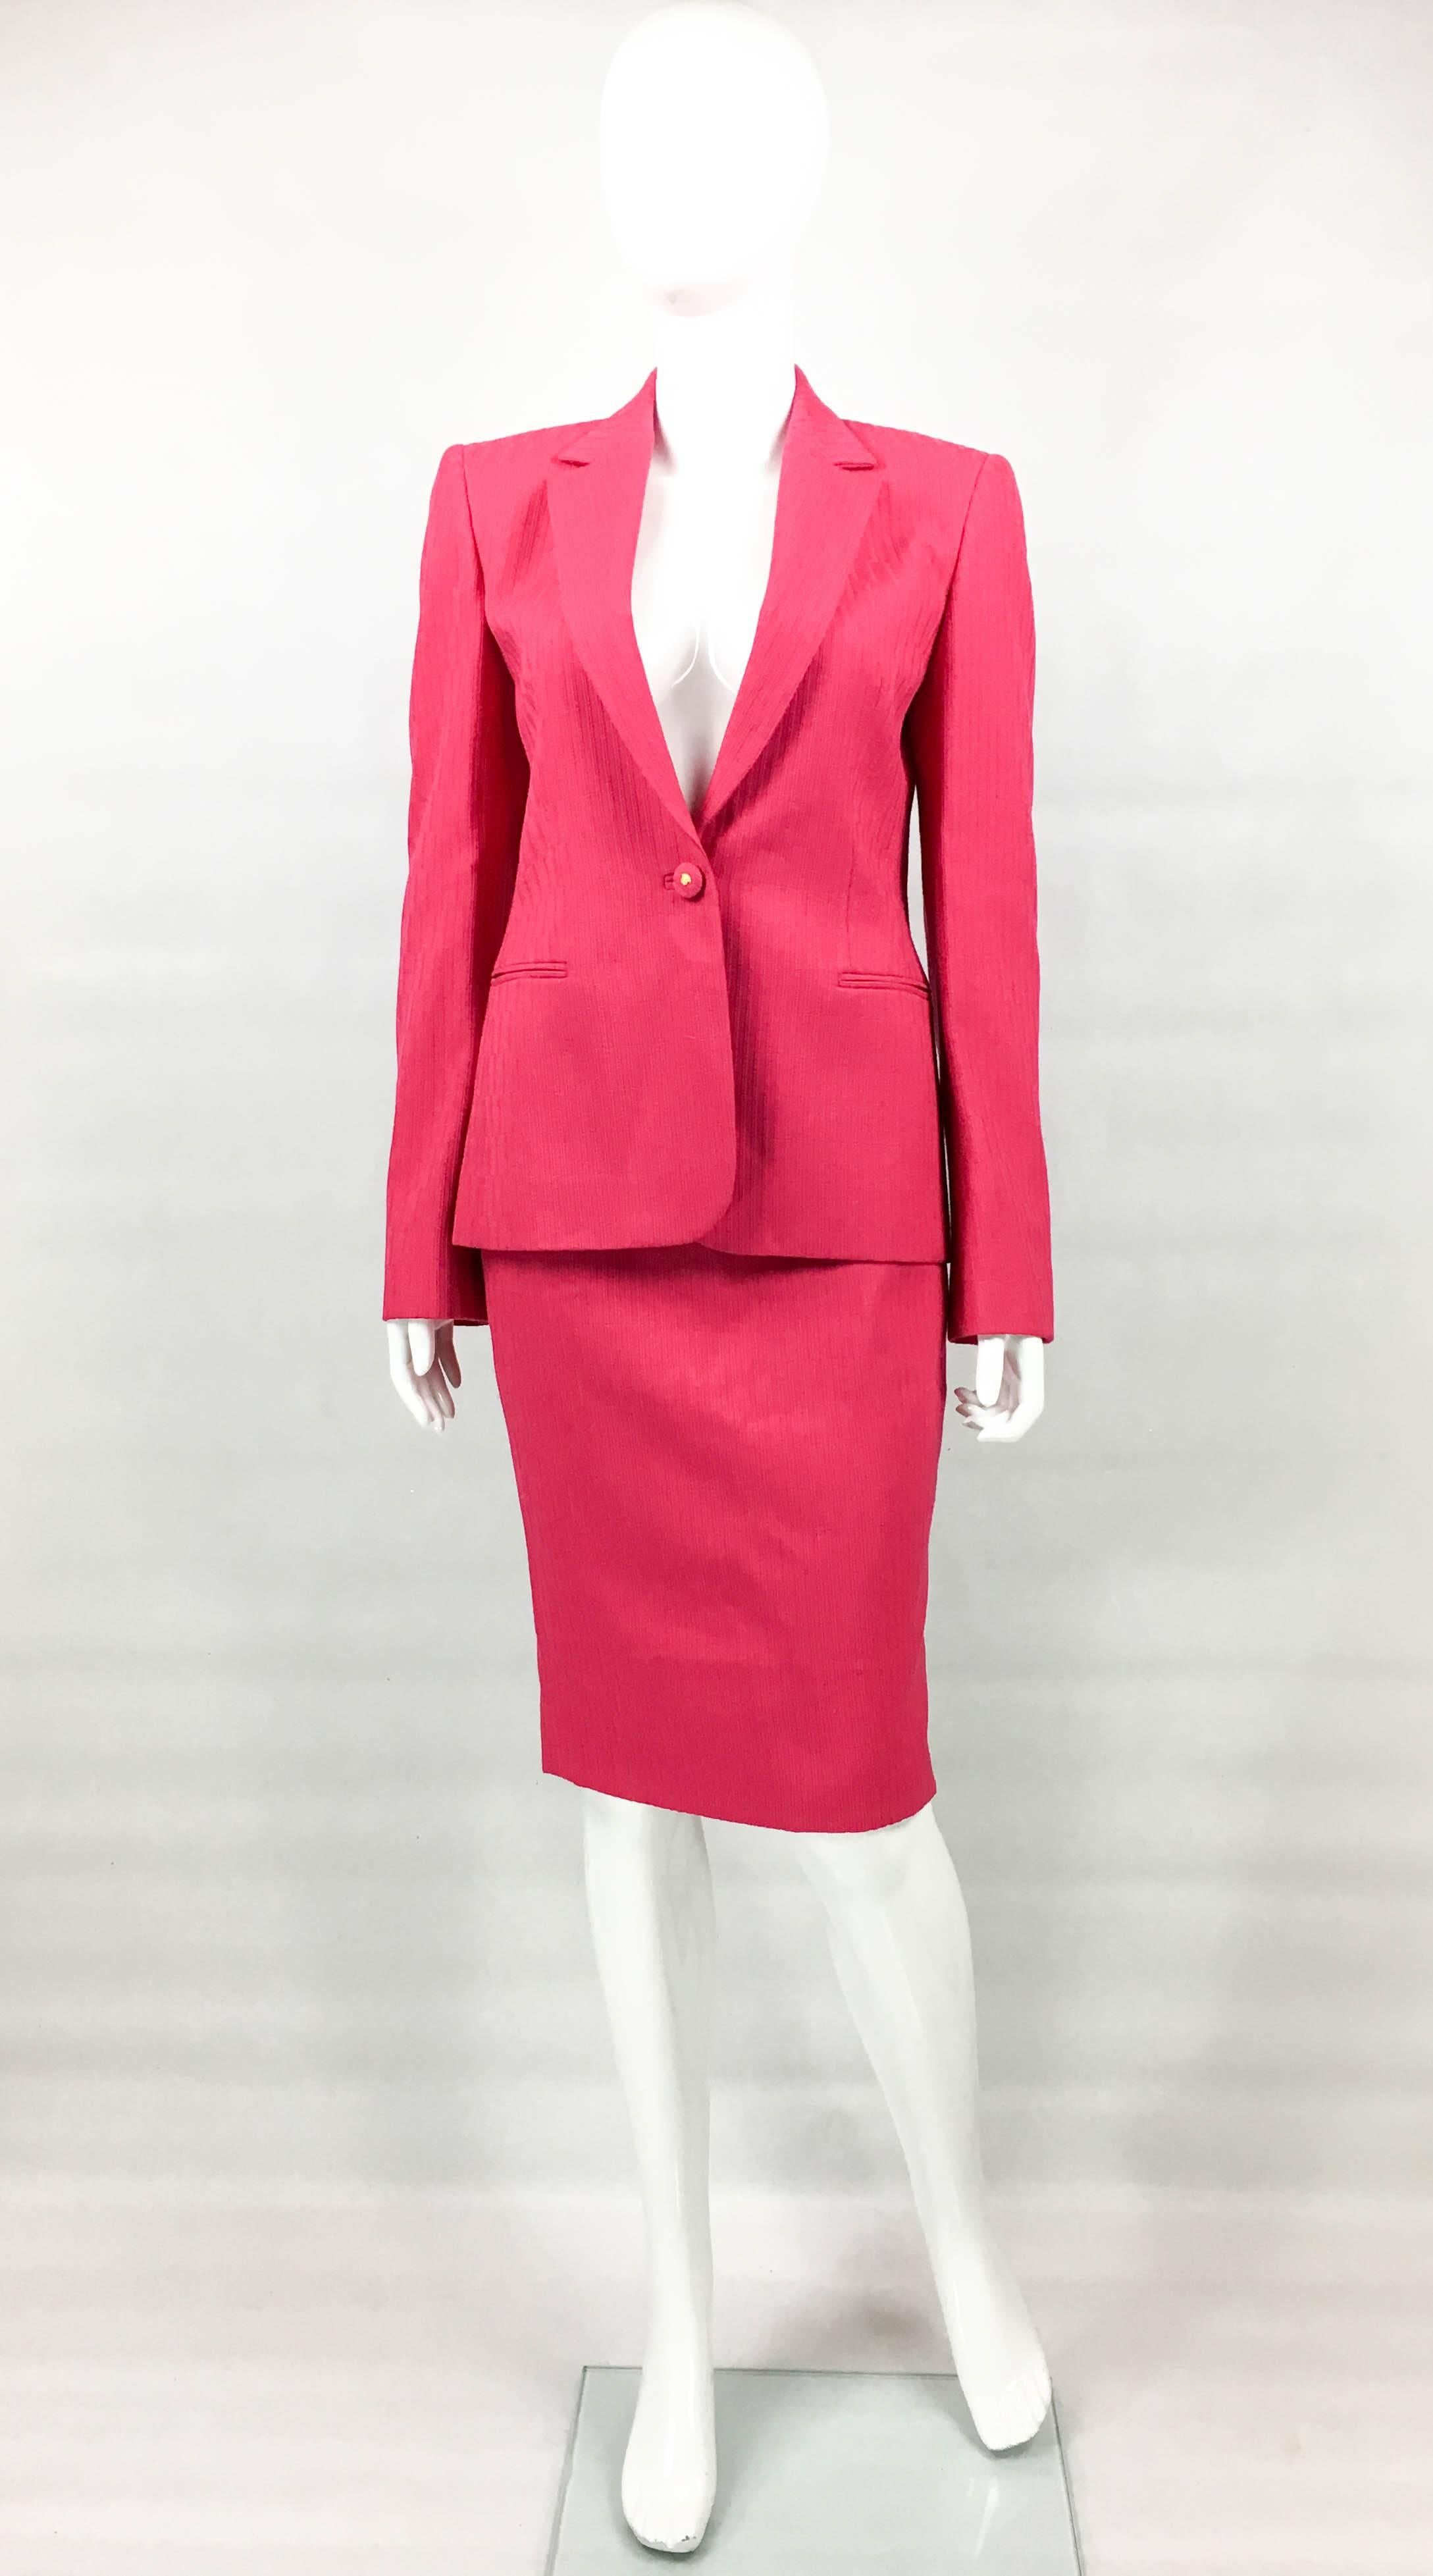 Vintage Gianni Versace Couture Shocking Pink Skirt Suit. This gorgeous ensemble by Gianni Versace dates back from the 1980’s. Made in shocking pink texturized wool, it comprises of a single-breasted jacket and a pencil skirt. The buttons are covered